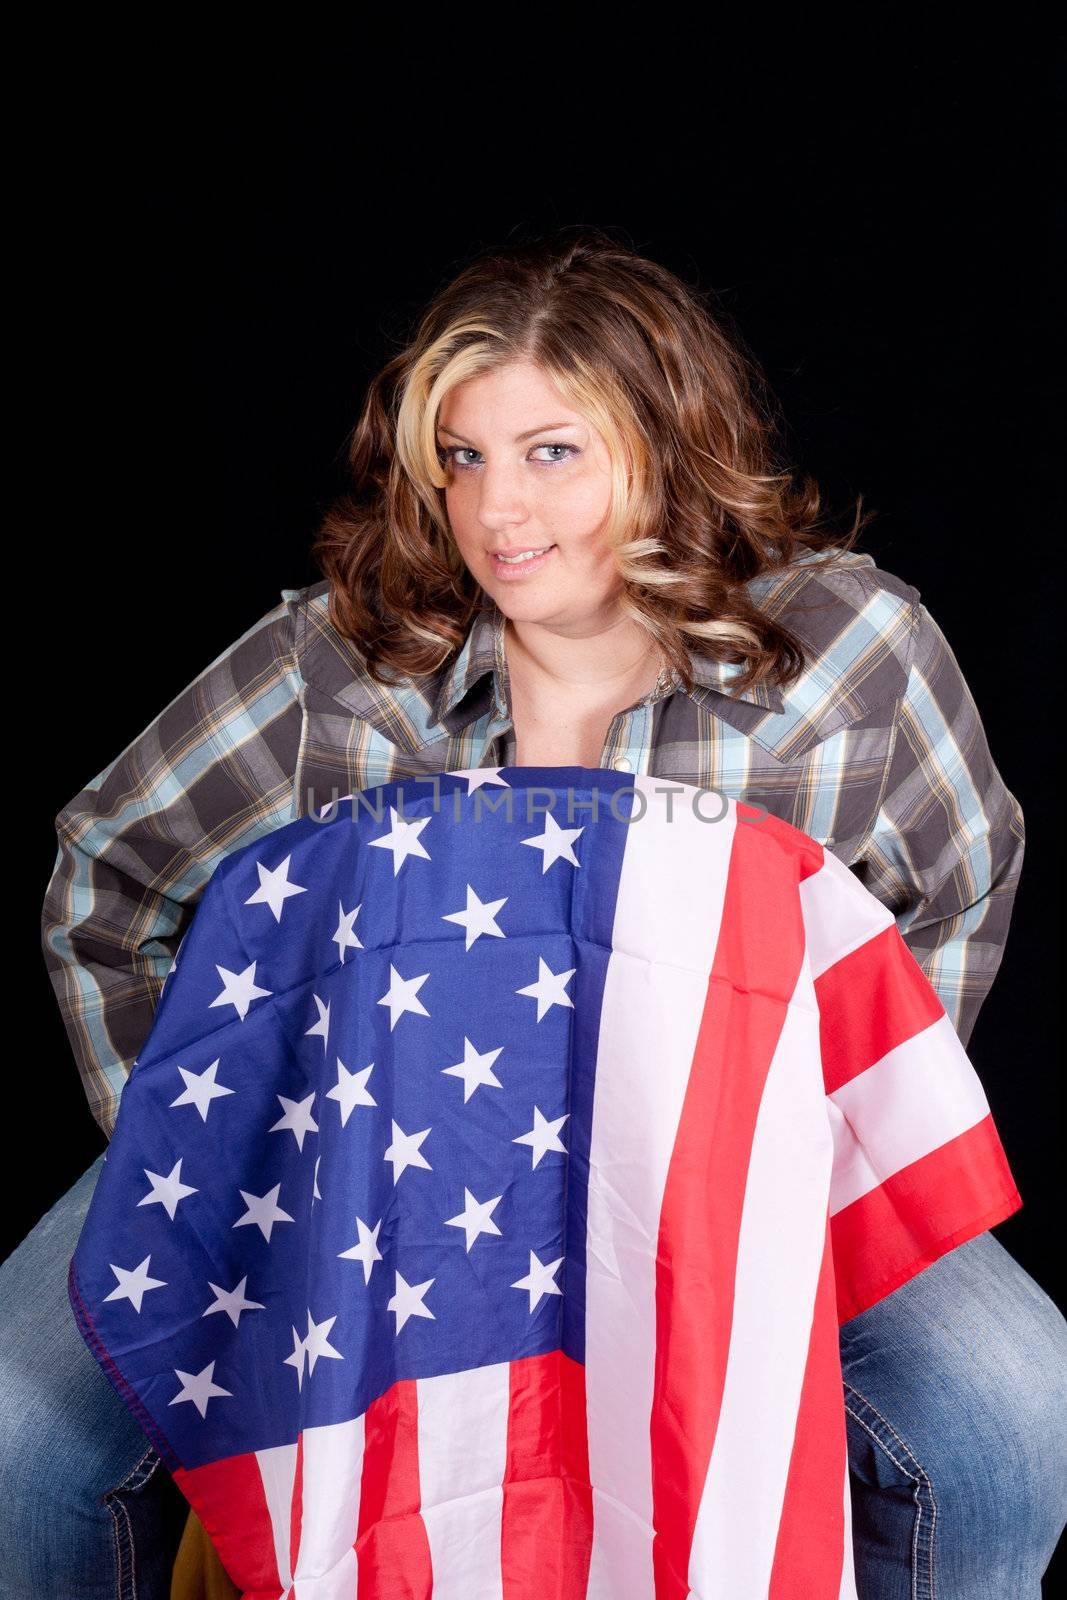 An American Cowgirl sitting on a chair with a flag on it.